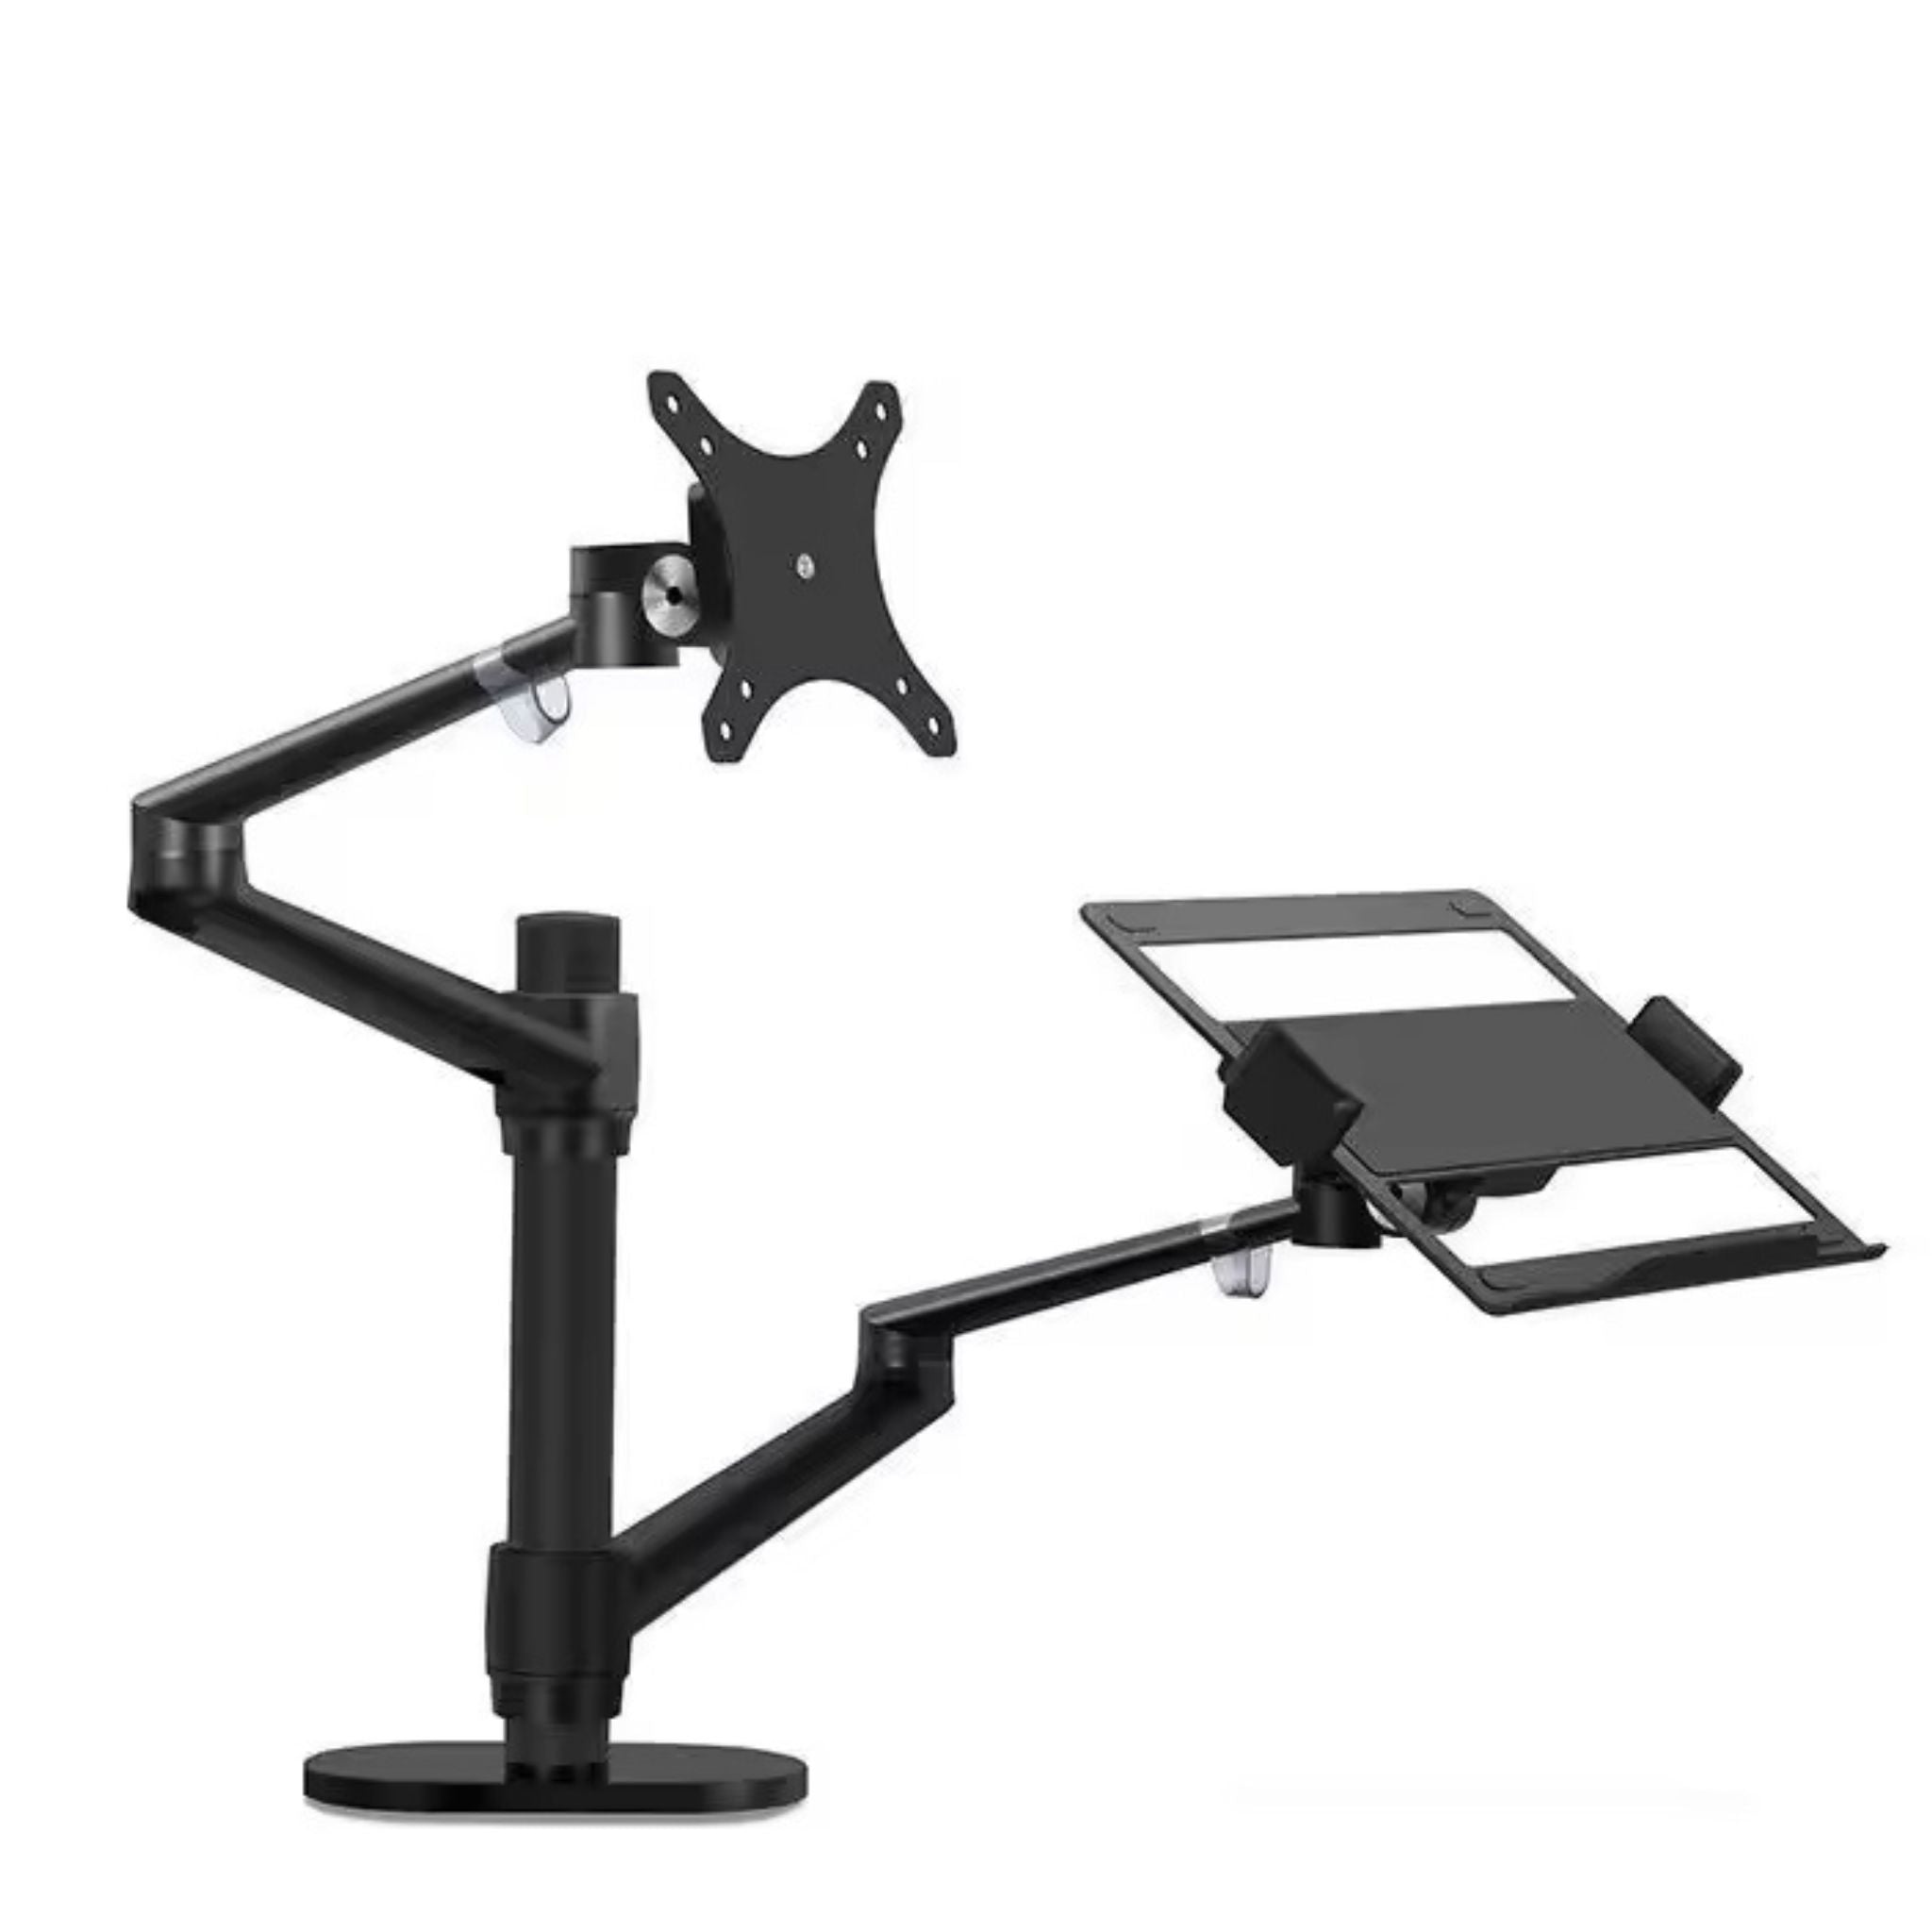 2 in 1 bracket for monitor and laptop